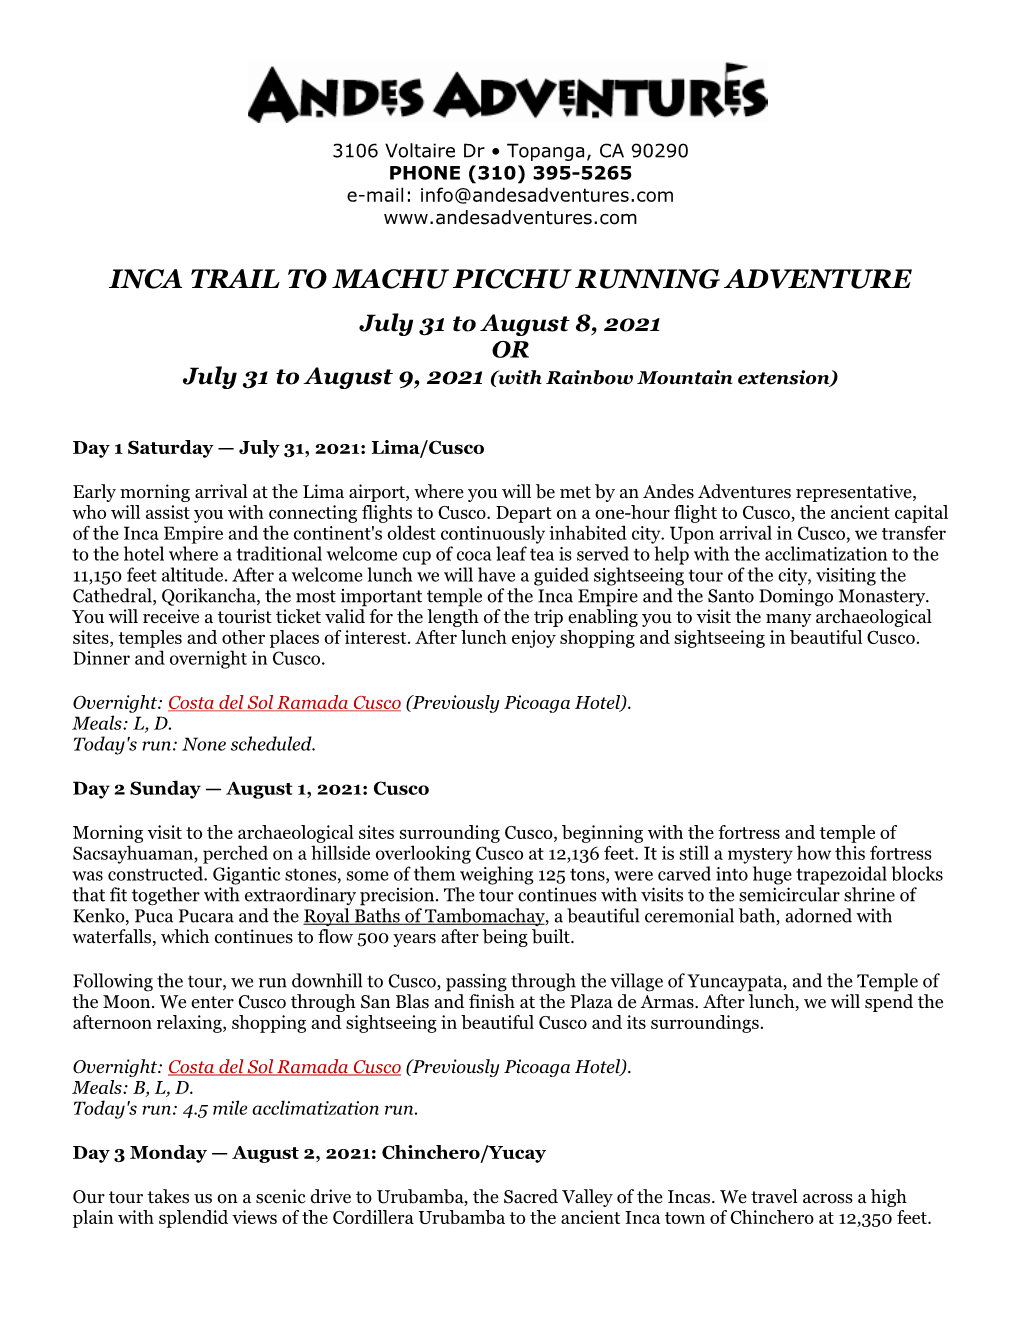 INCA TRAIL to MACHU PICCHU RUNNING ADVENTURE July 31 to August 8, 2021 OR July 31 to August 9, 2021 (With Rainbow Mountain Extension)